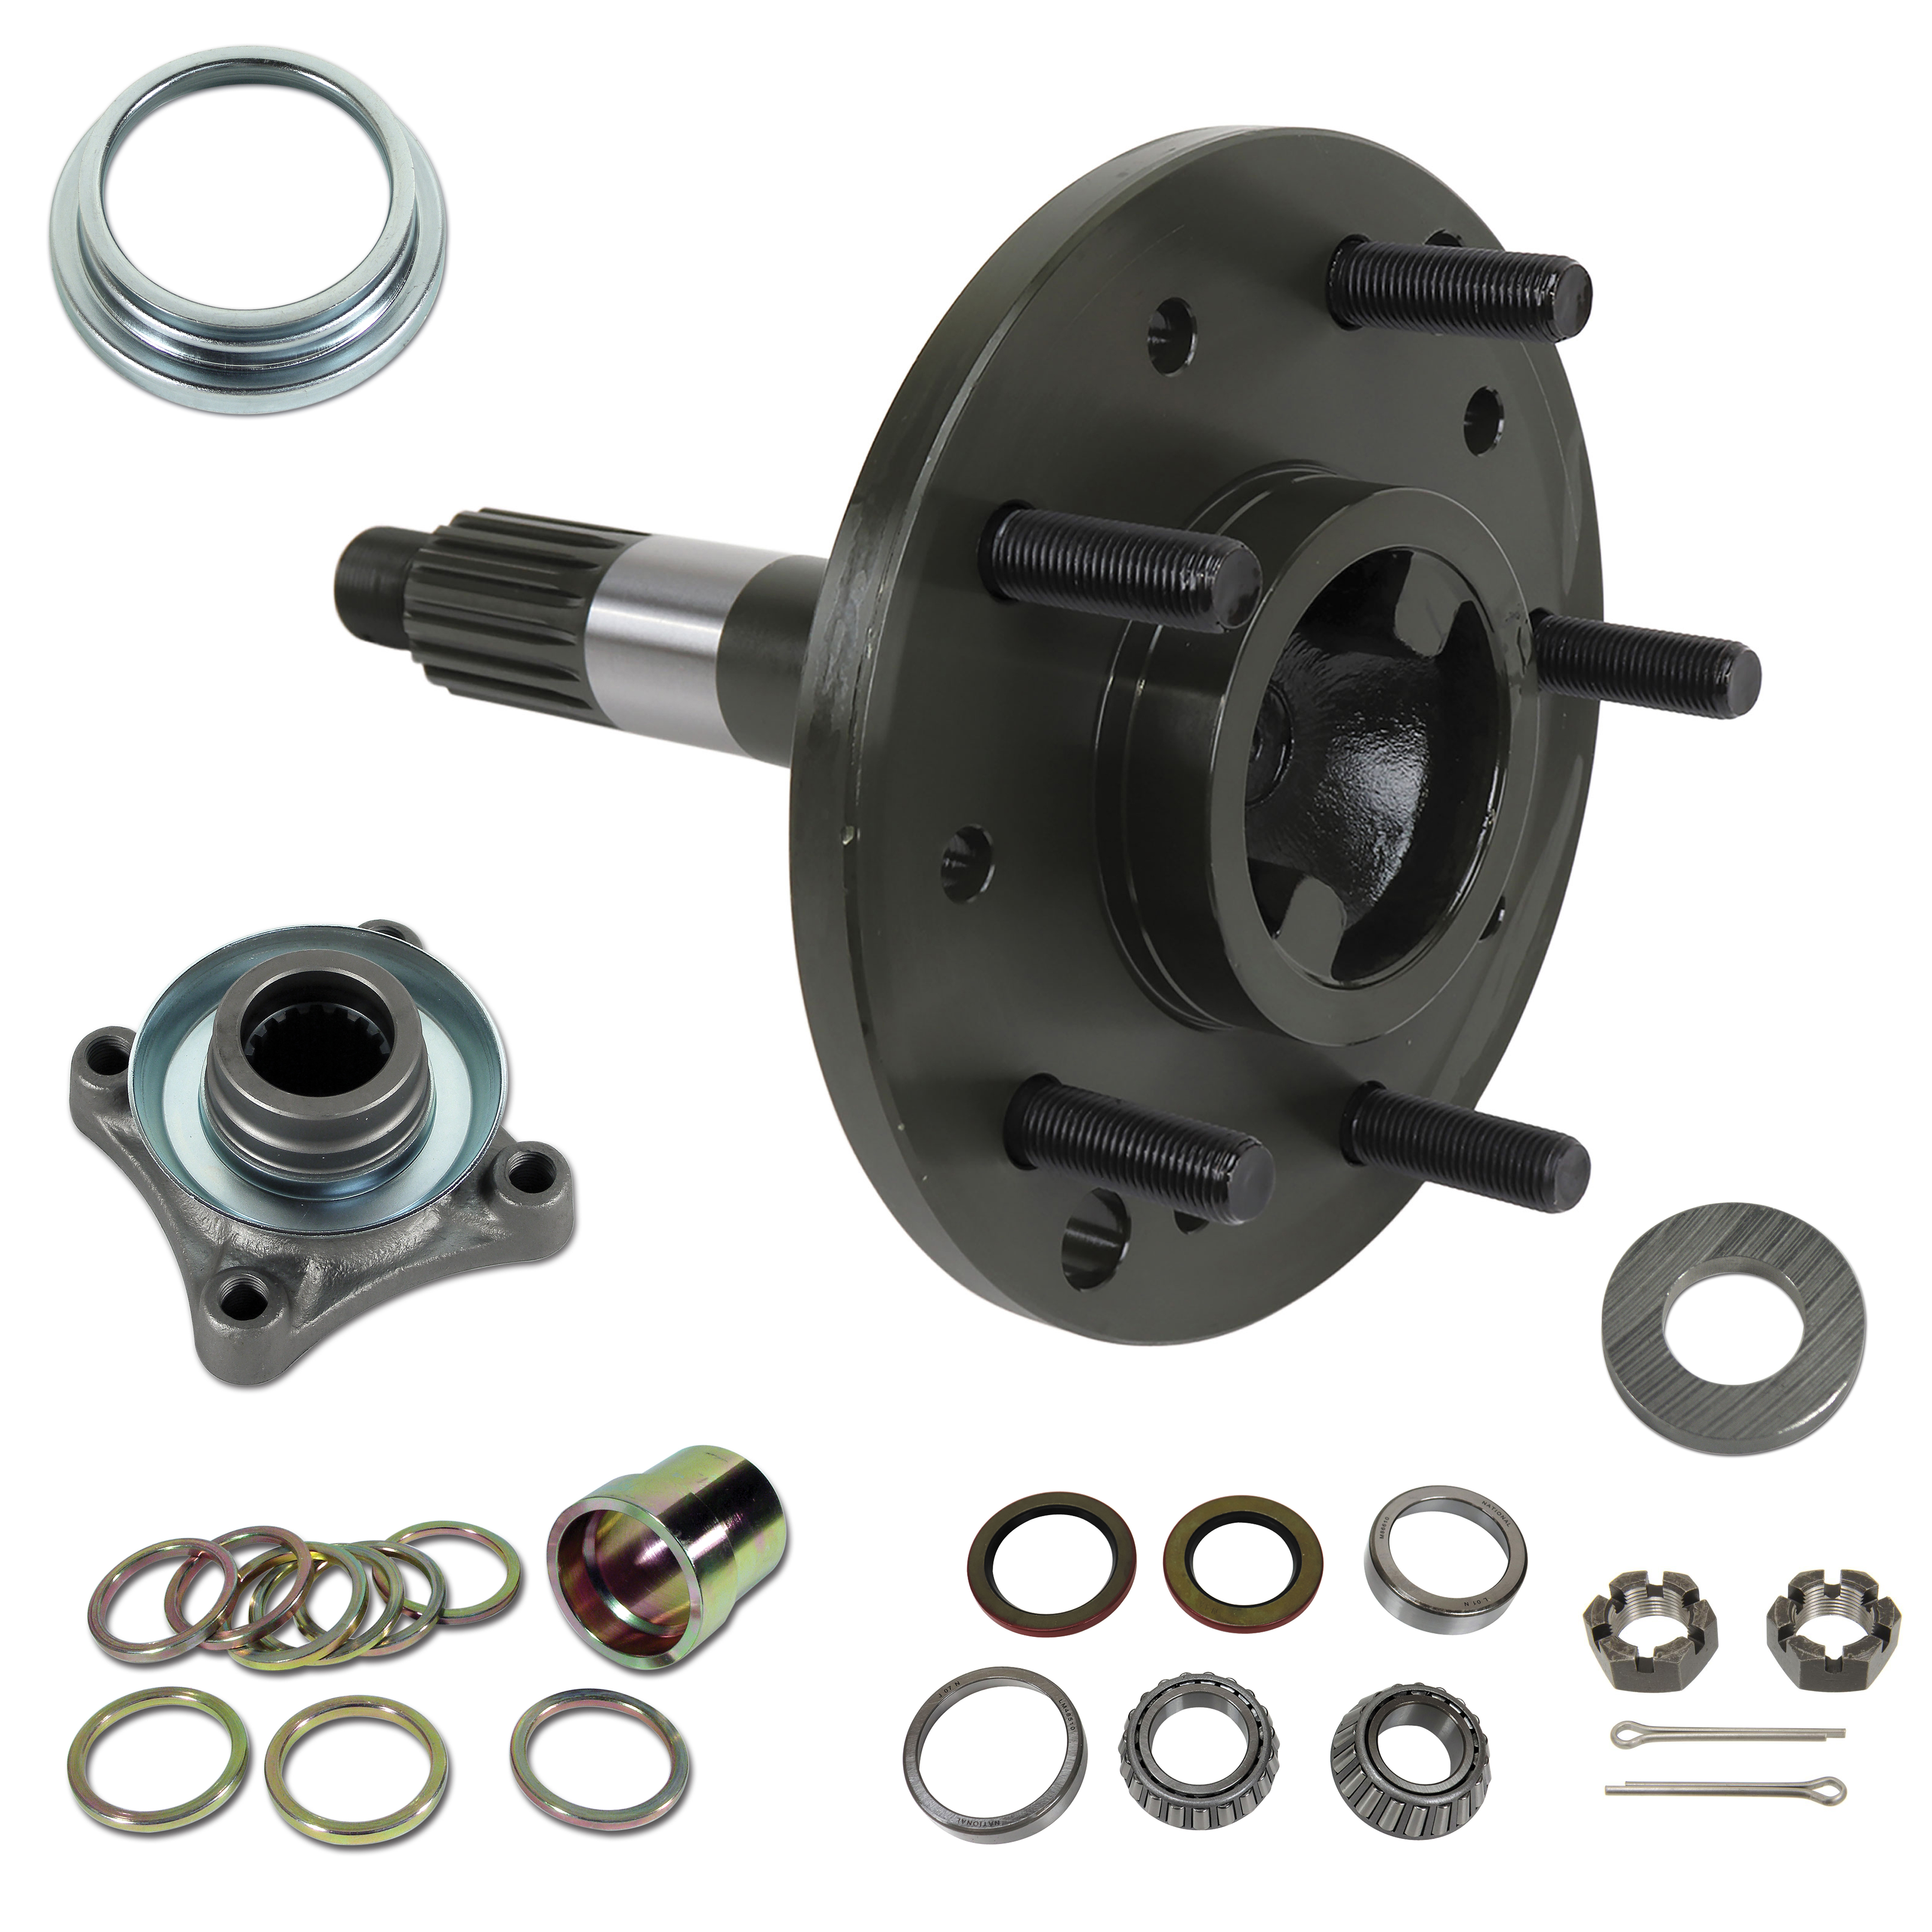 1965-1979 Chevrolet Corvette Rear Spindle Refresh Kit W/New Spindle, Bearings, Shims & Seals - CA